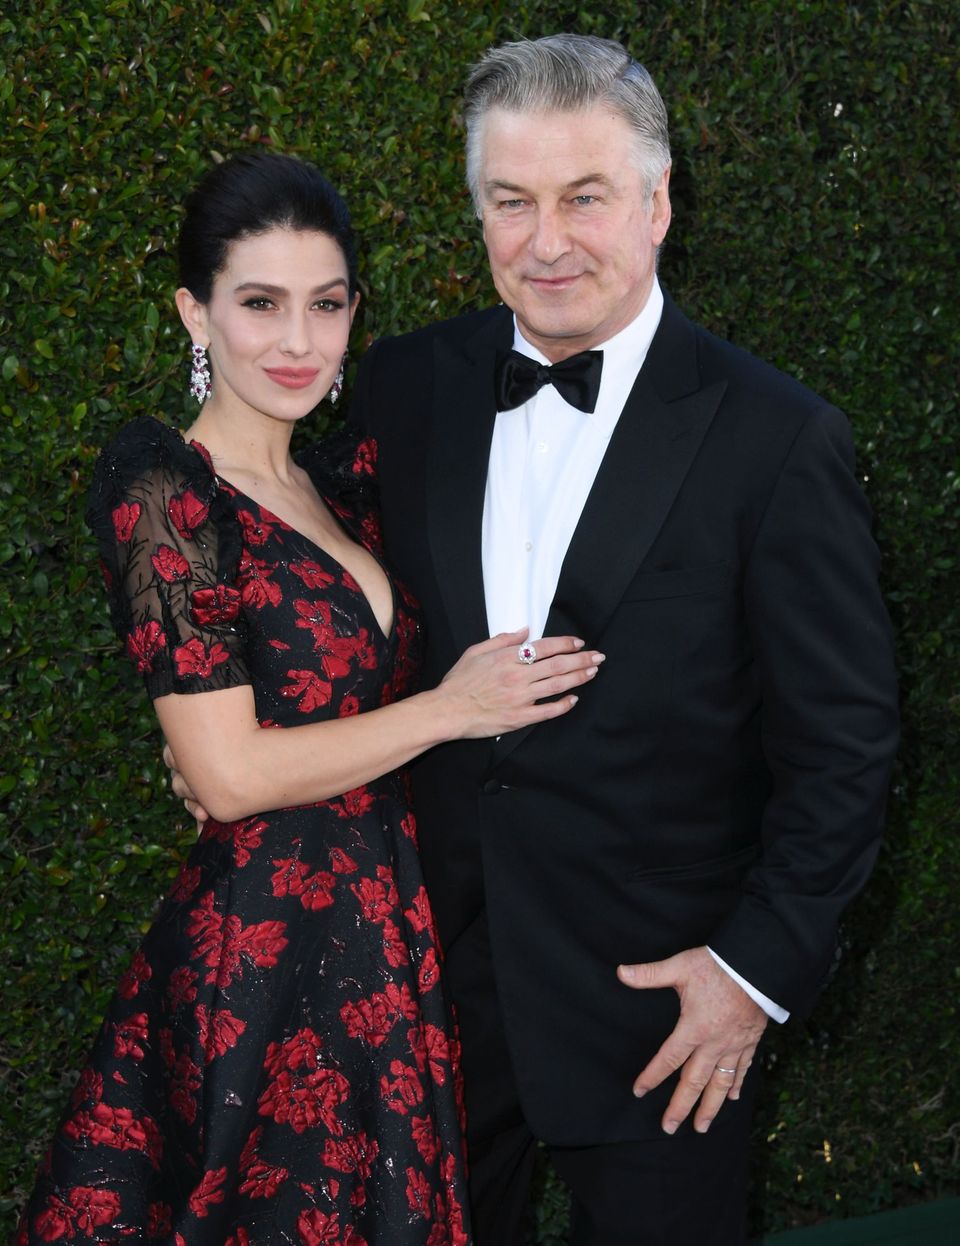 Hilaria and Alec Baldwin during the 25th Annual Screen Actors Guild Awards on January 27, 2019, in Los Angeles, California. | Source: Getty Images